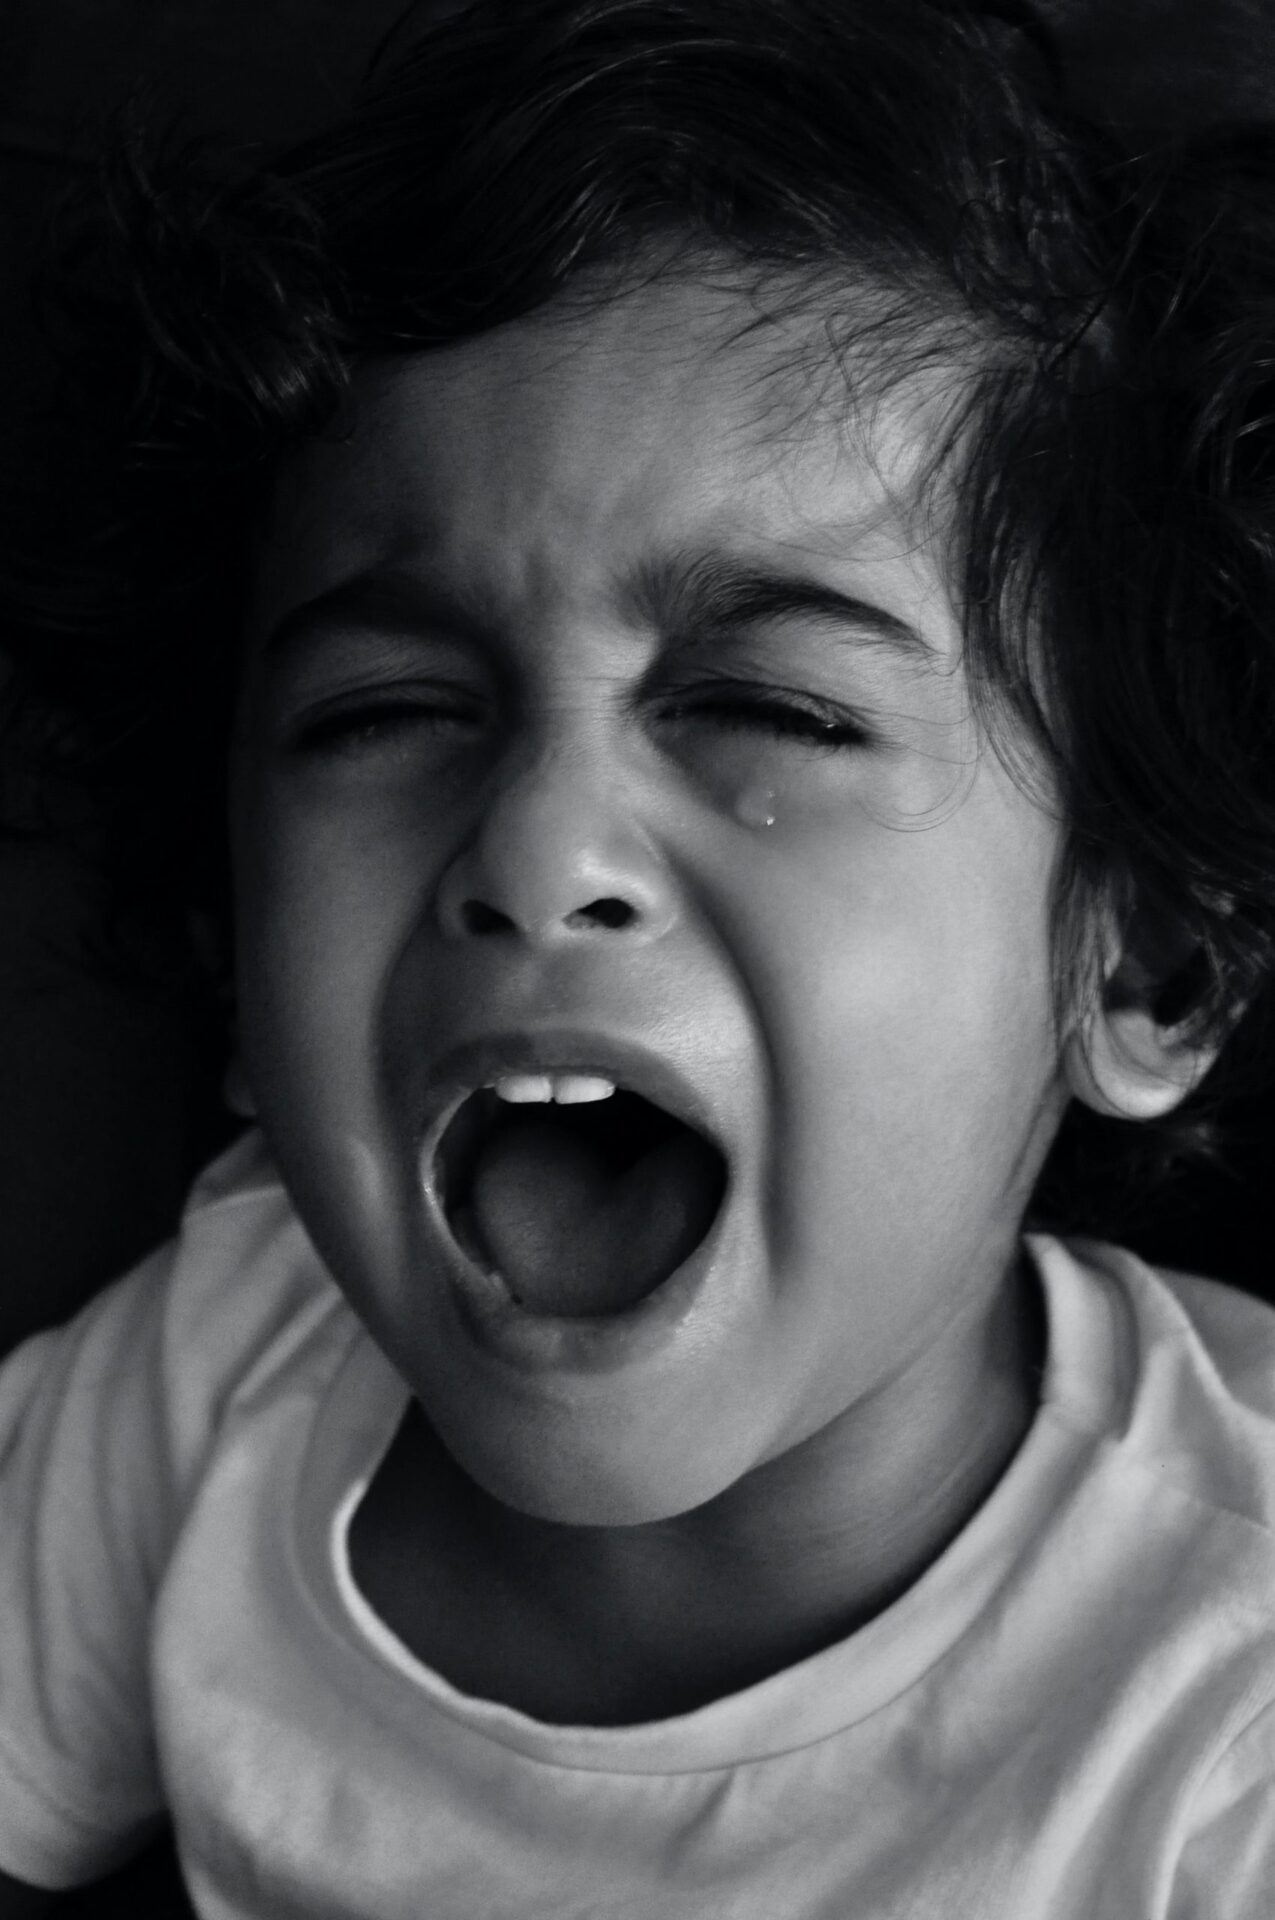 black and white photo of a child crying with their mouth open